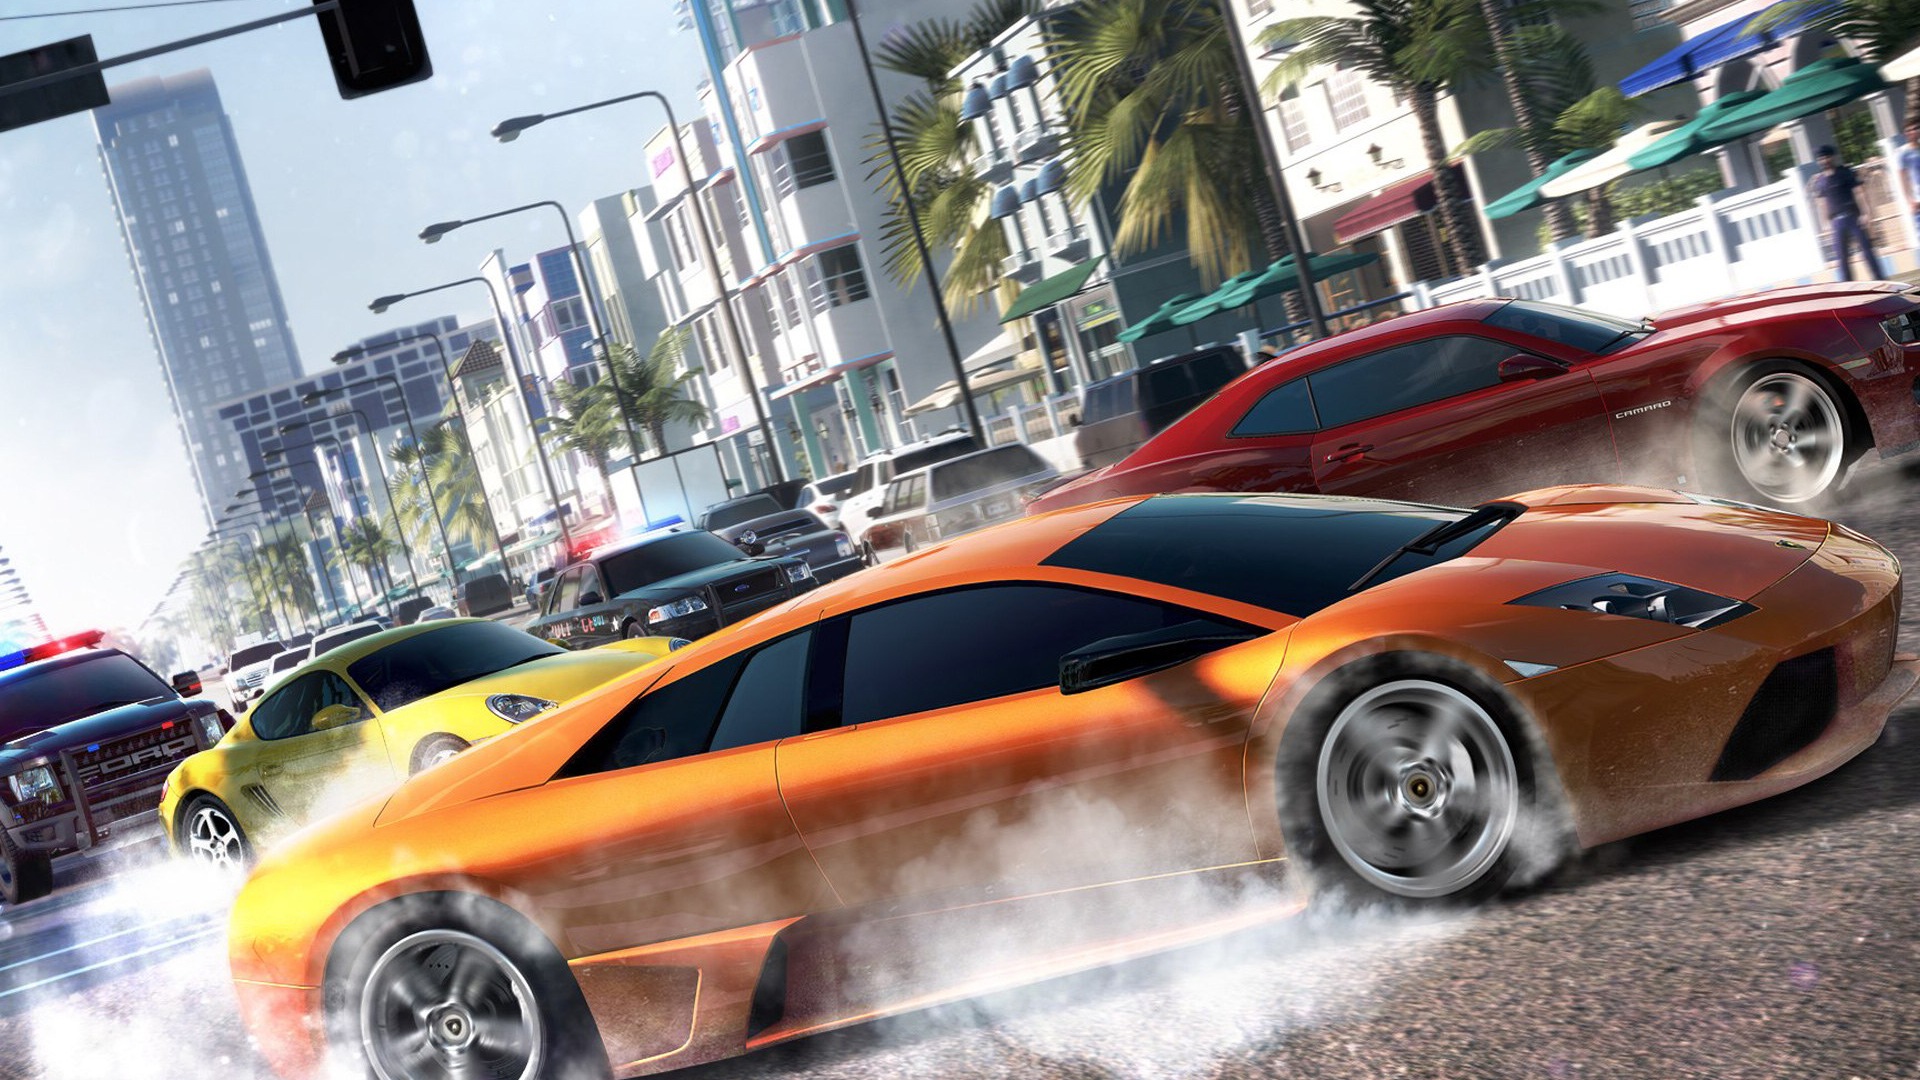 The Crew game HD wallpapers #1 - 1920x1080